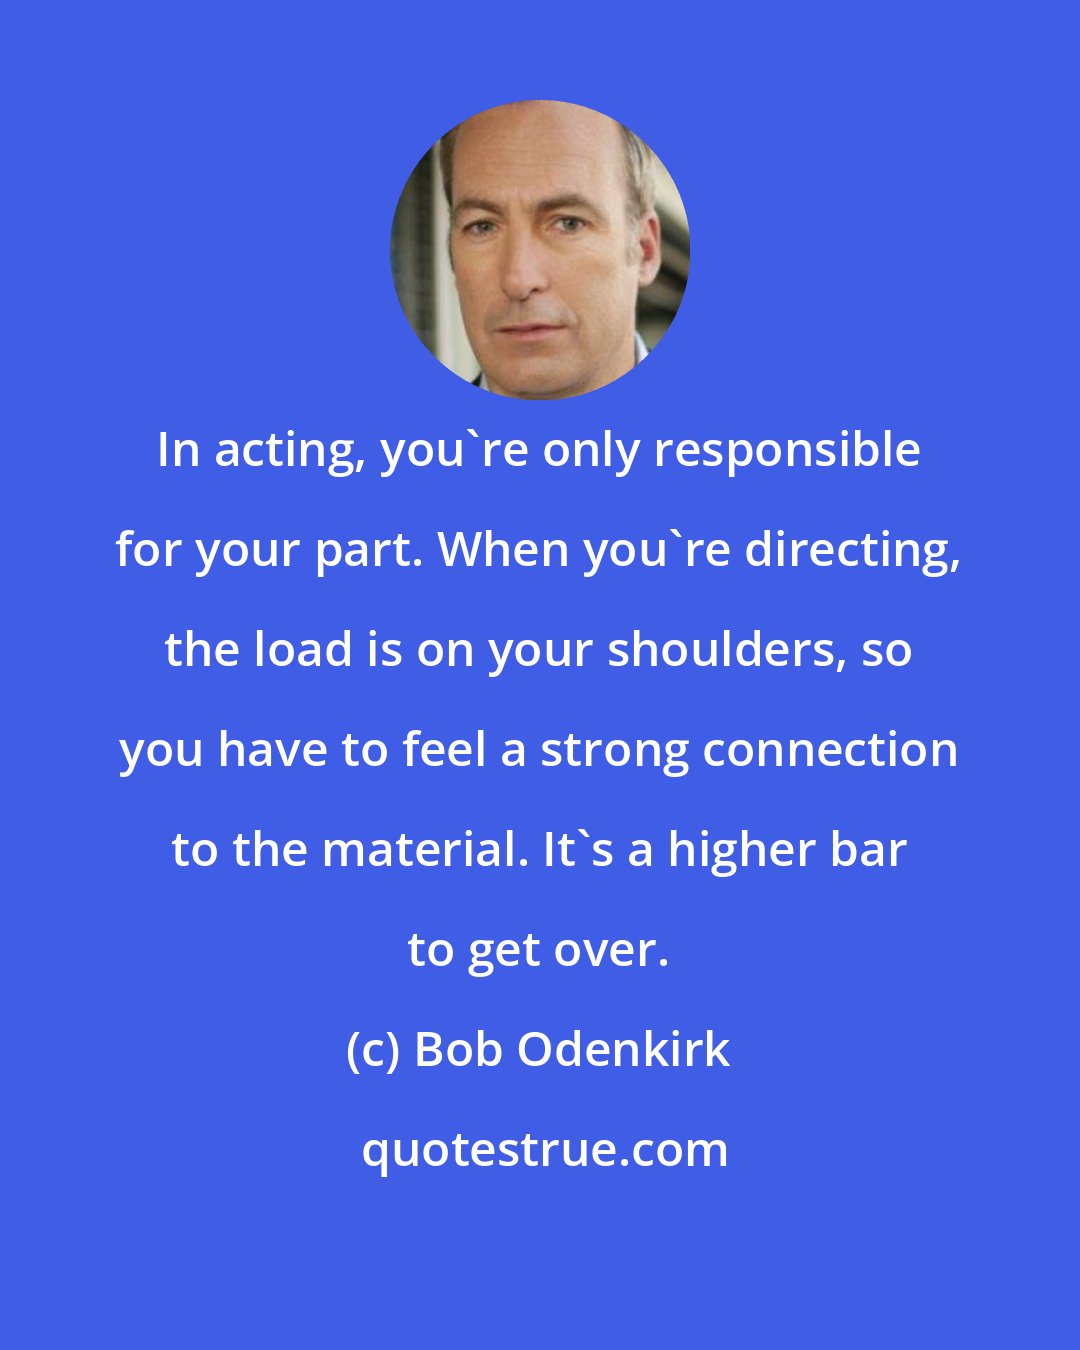 Bob Odenkirk: In acting, you're only responsible for your part. When you're directing, the load is on your shoulders, so you have to feel a strong connection to the material. It's a higher bar to get over.